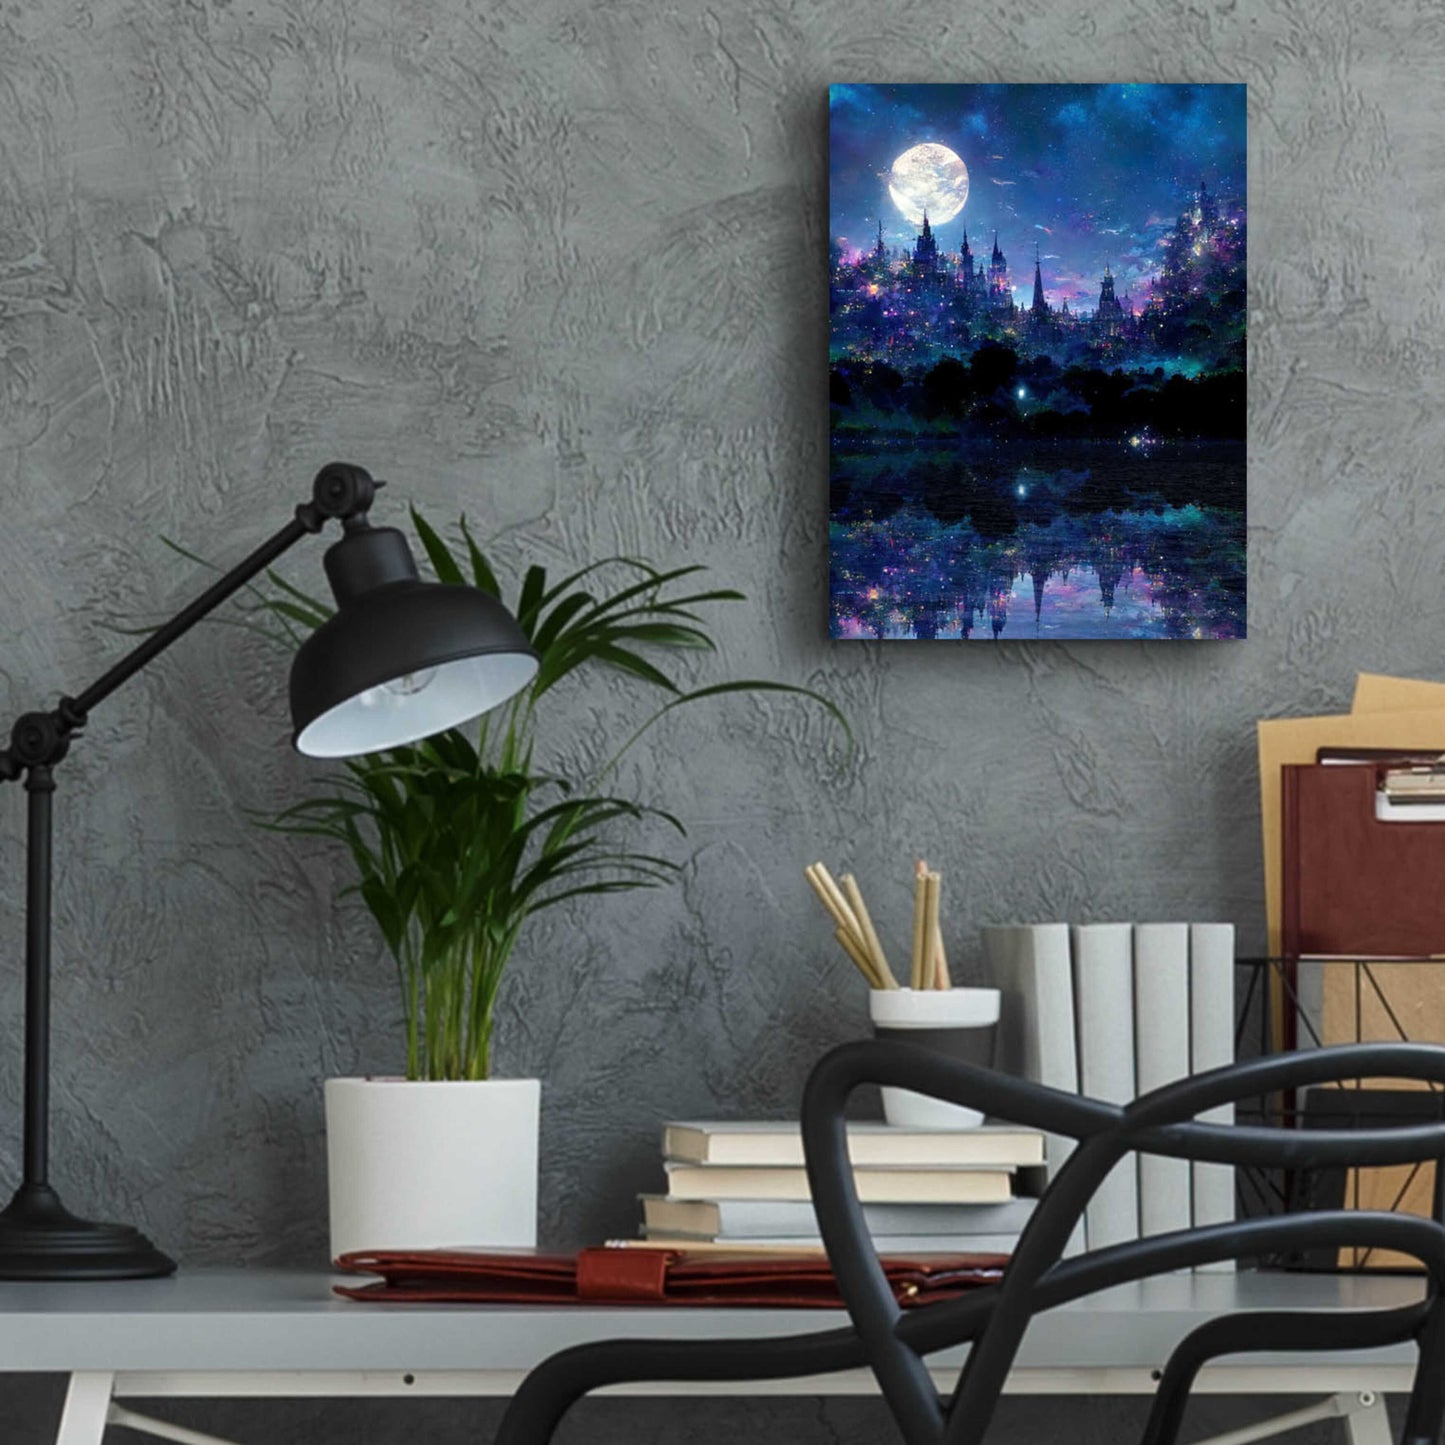 Epic Art 'Glowing In The Night' by Cameron Gray, Acrylic Glass Wall Art,12x16